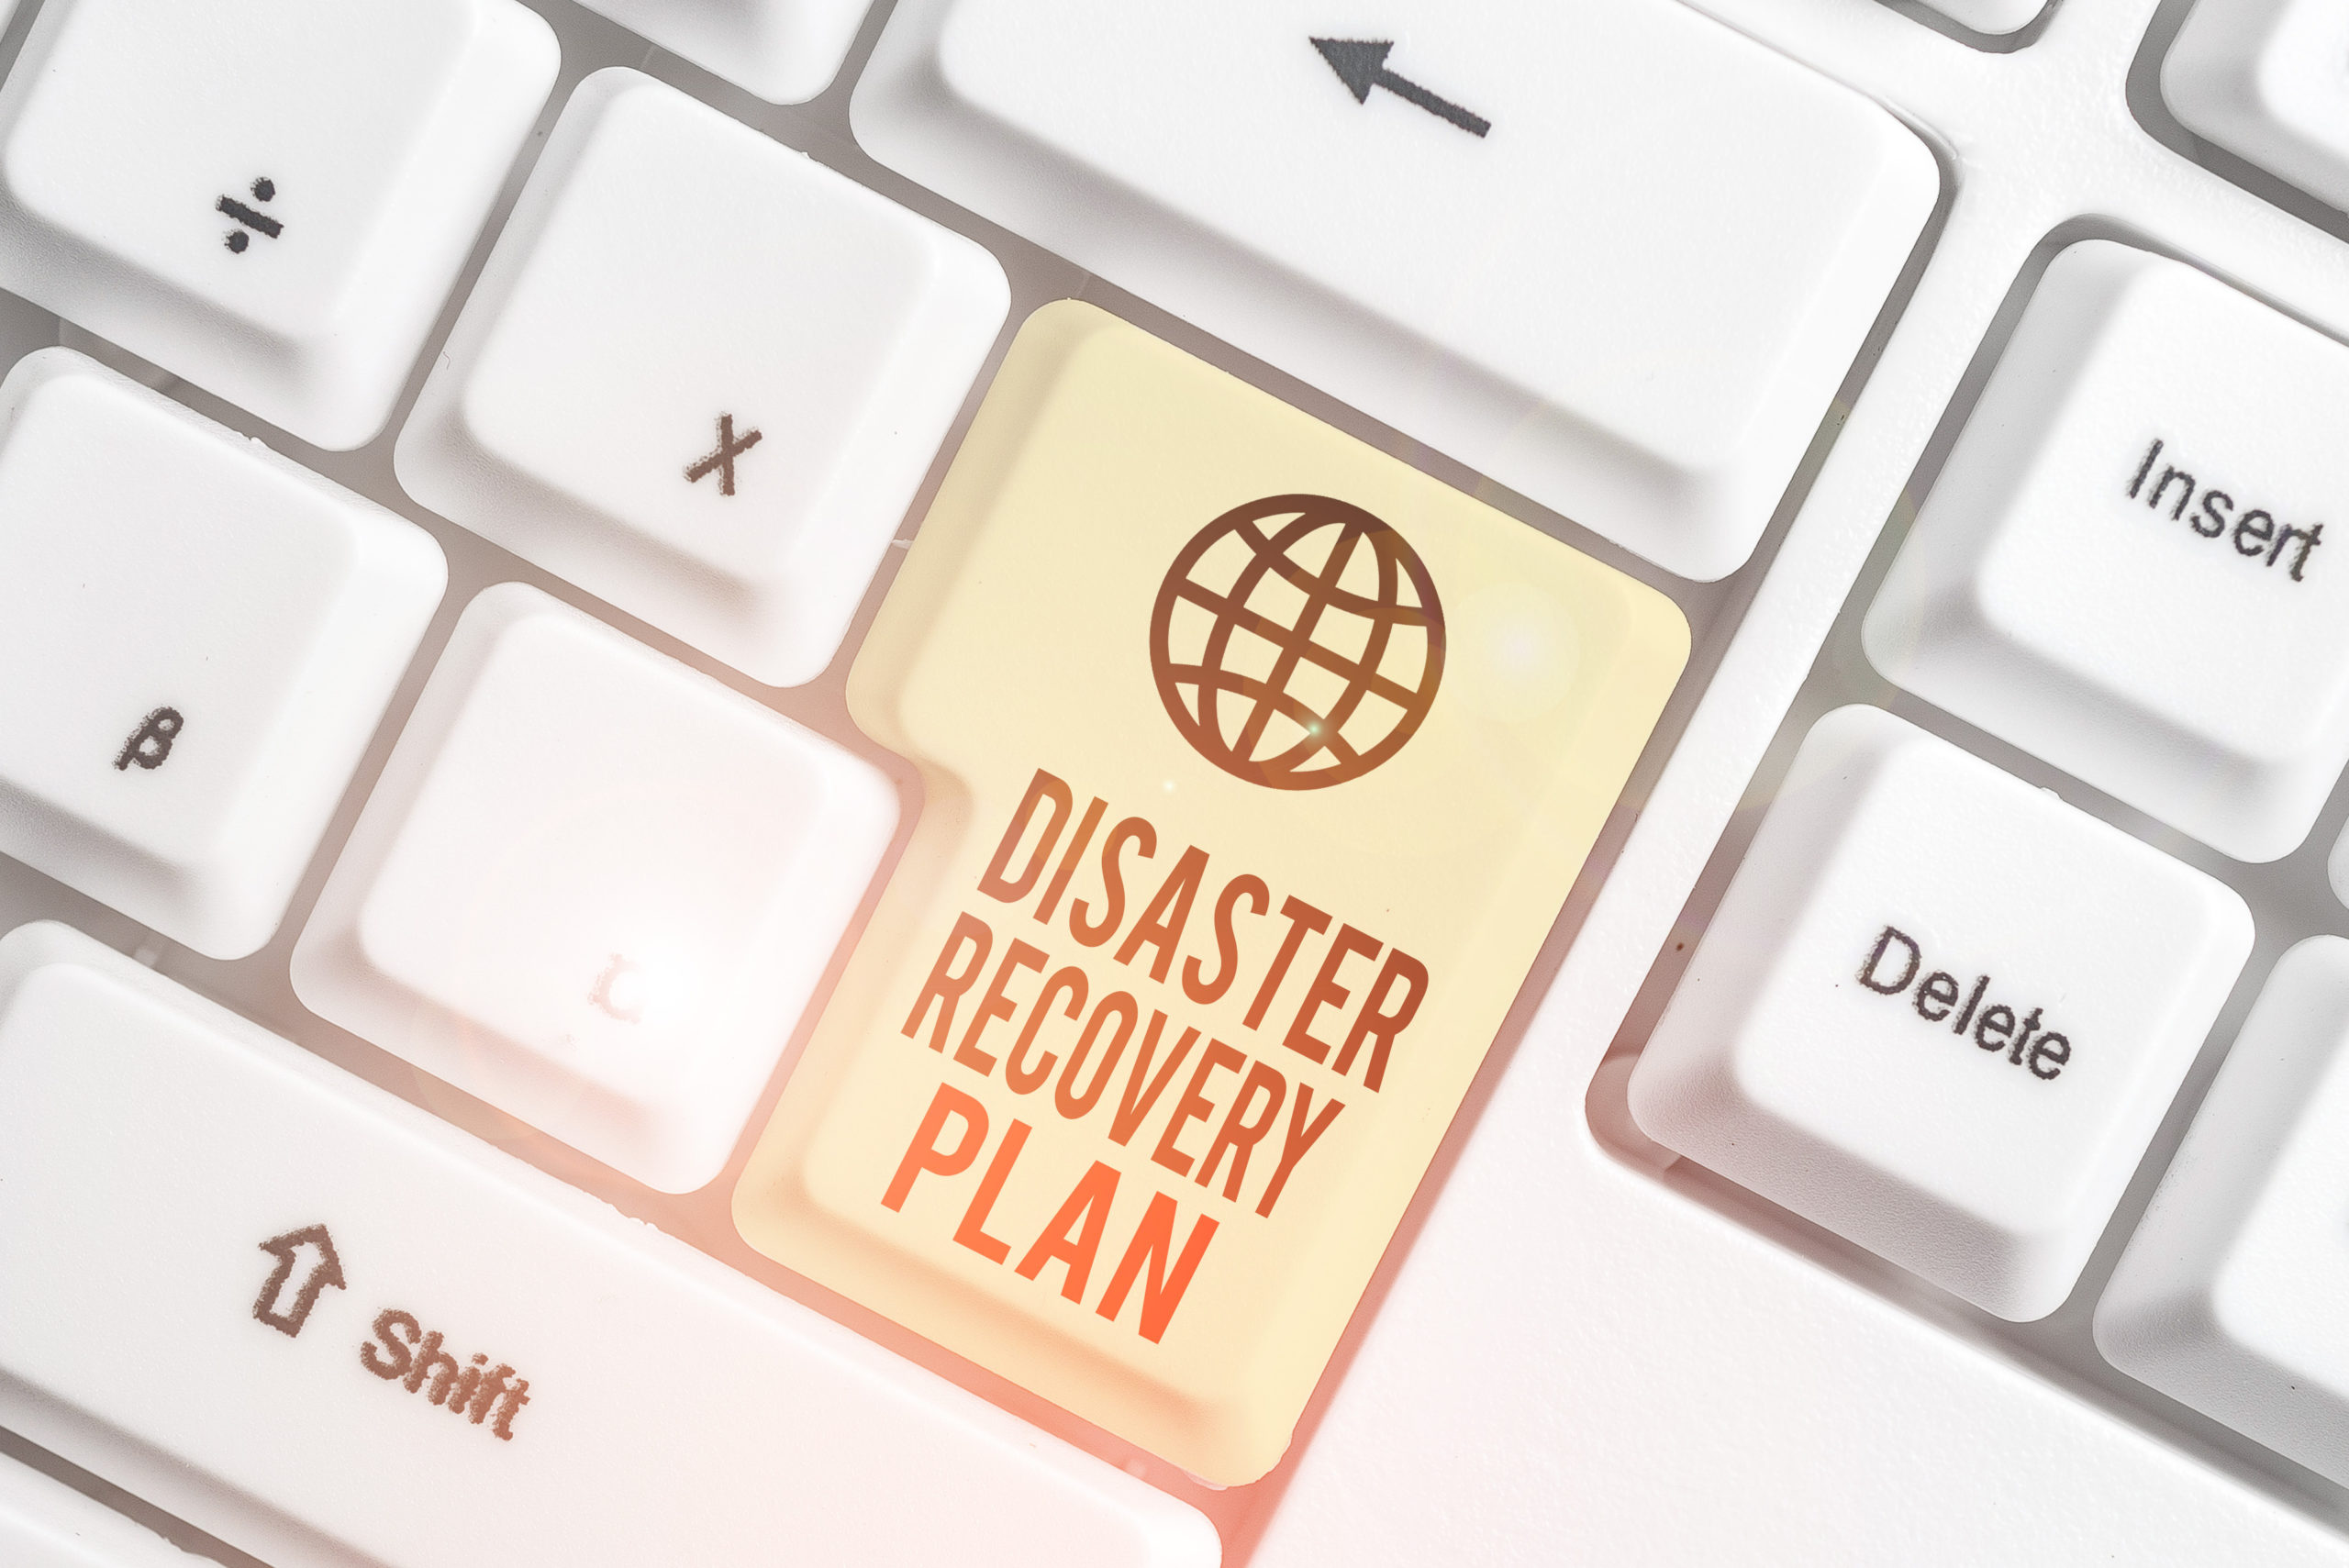 Disaster Recovery Plan & Data Backup